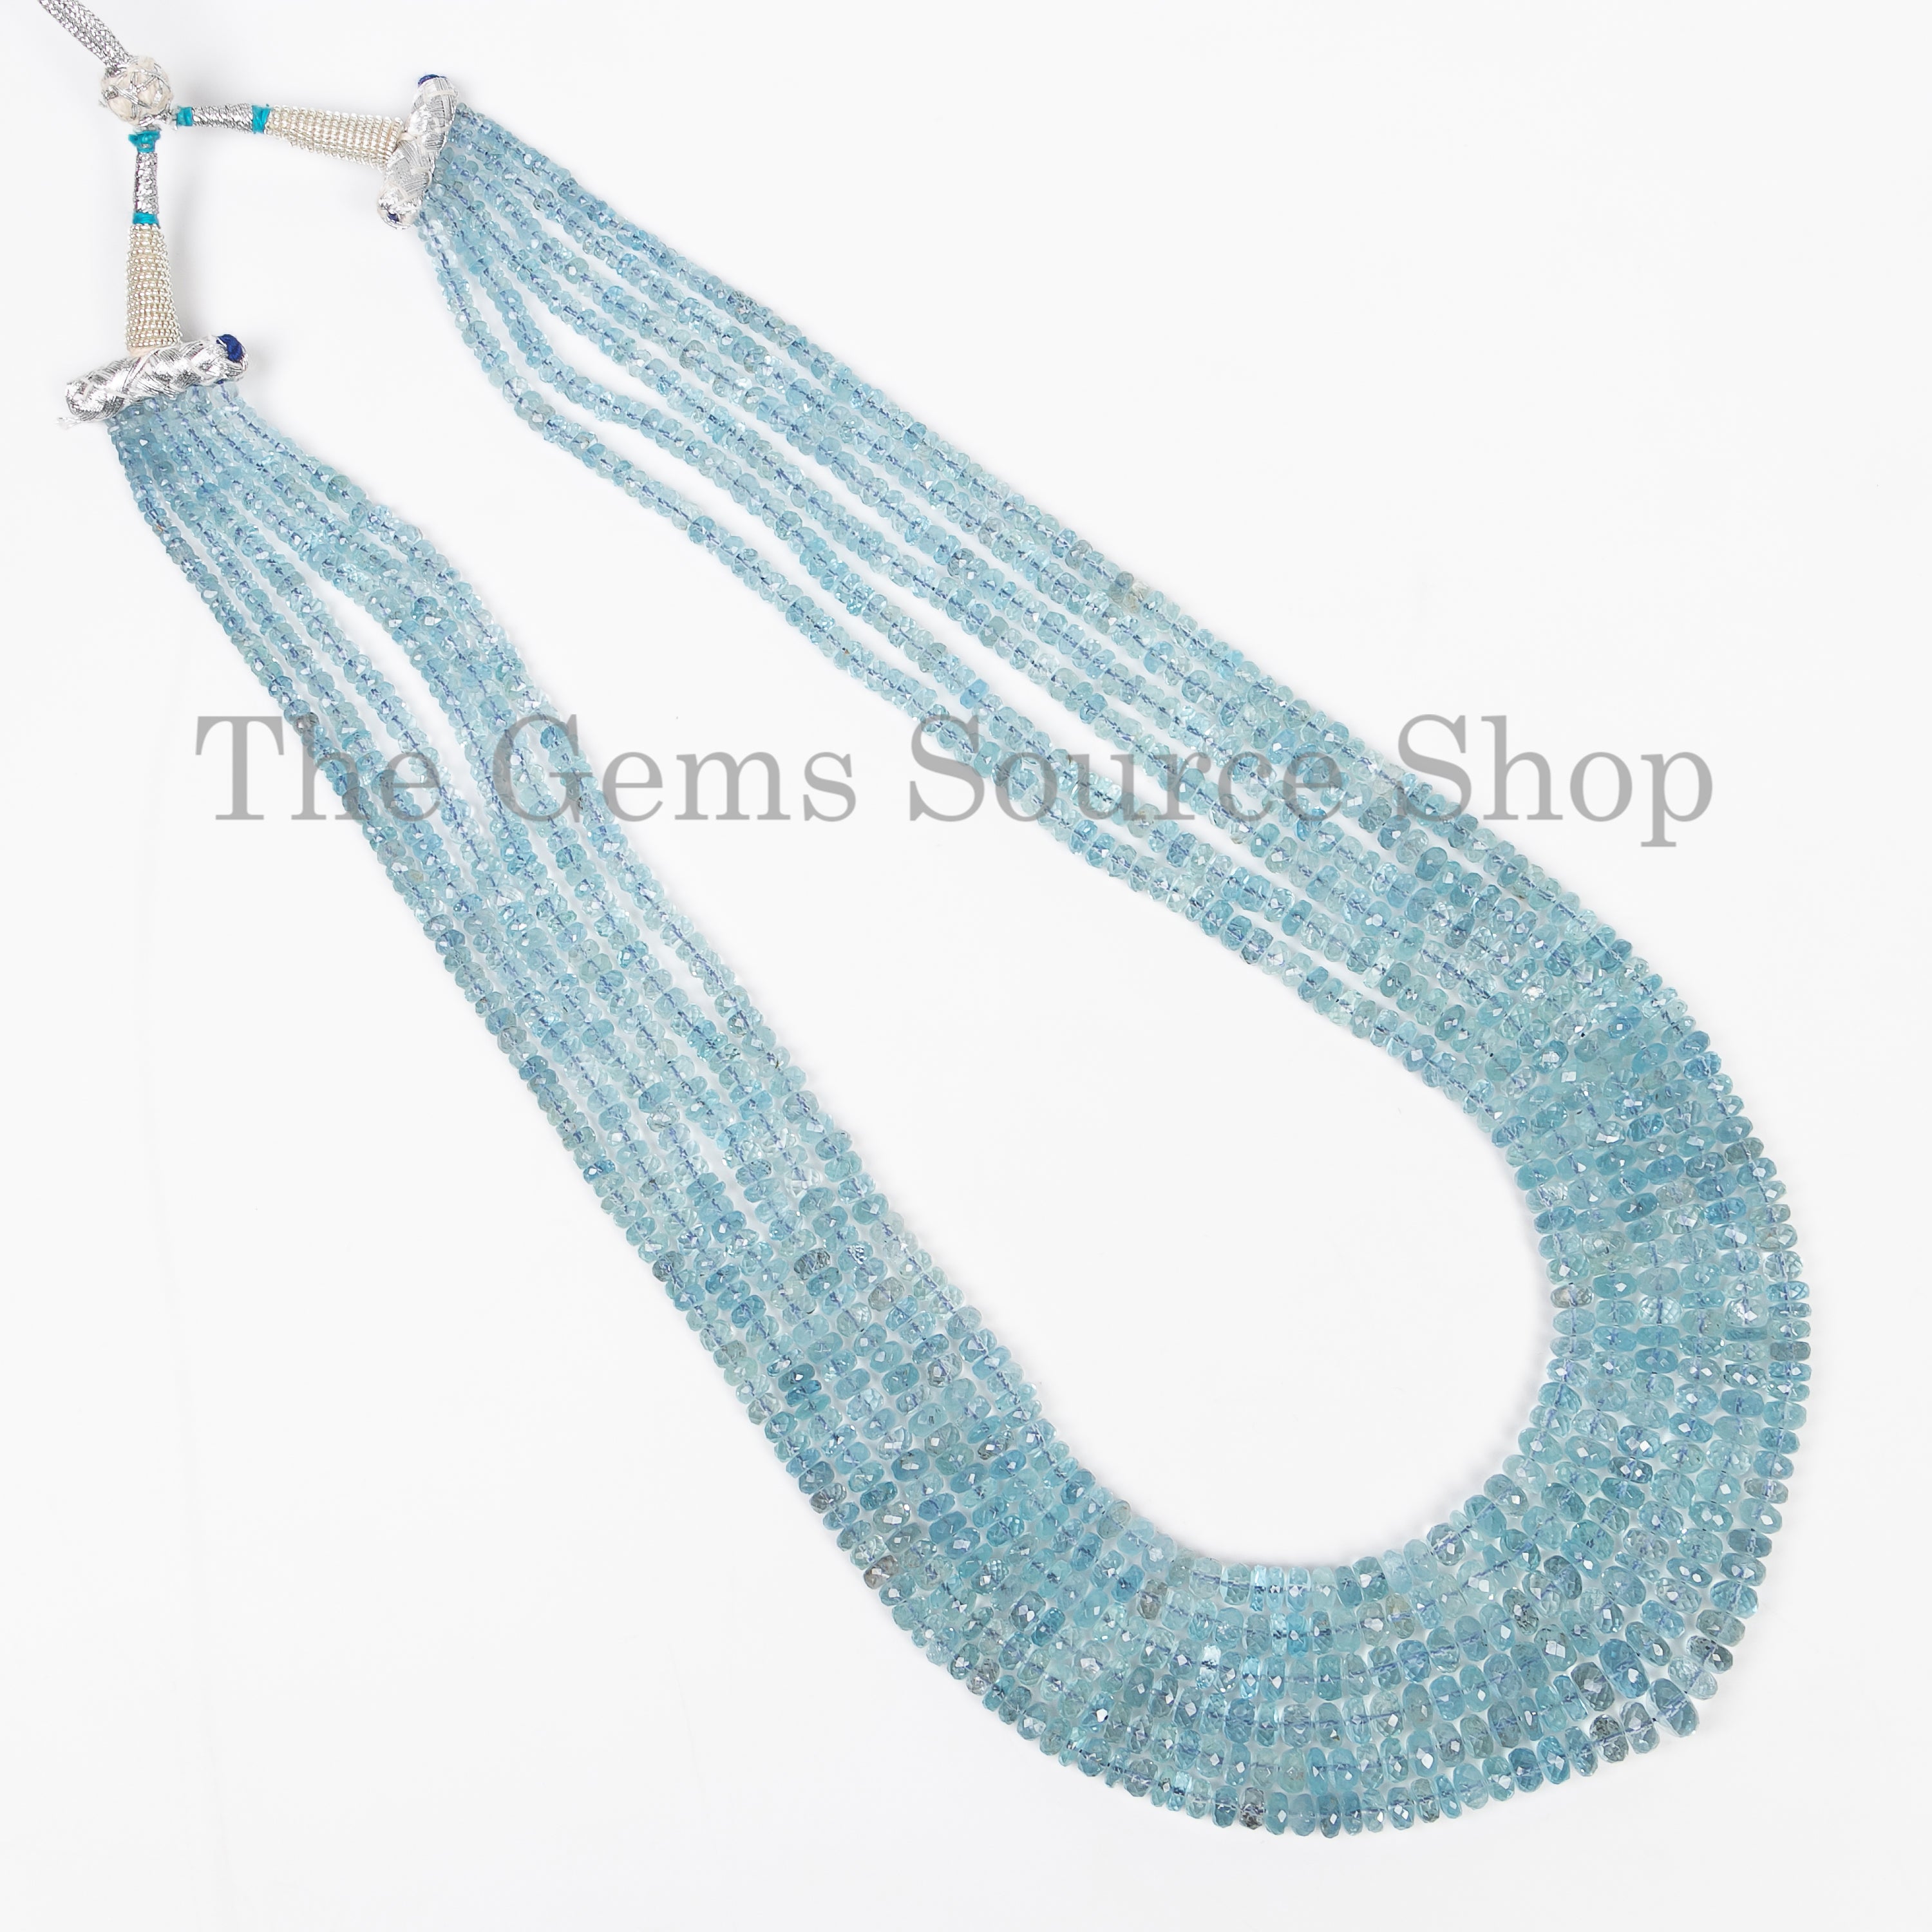 Aquamarine Faceted Rondelle Necklace (6 layered) TGS-4946